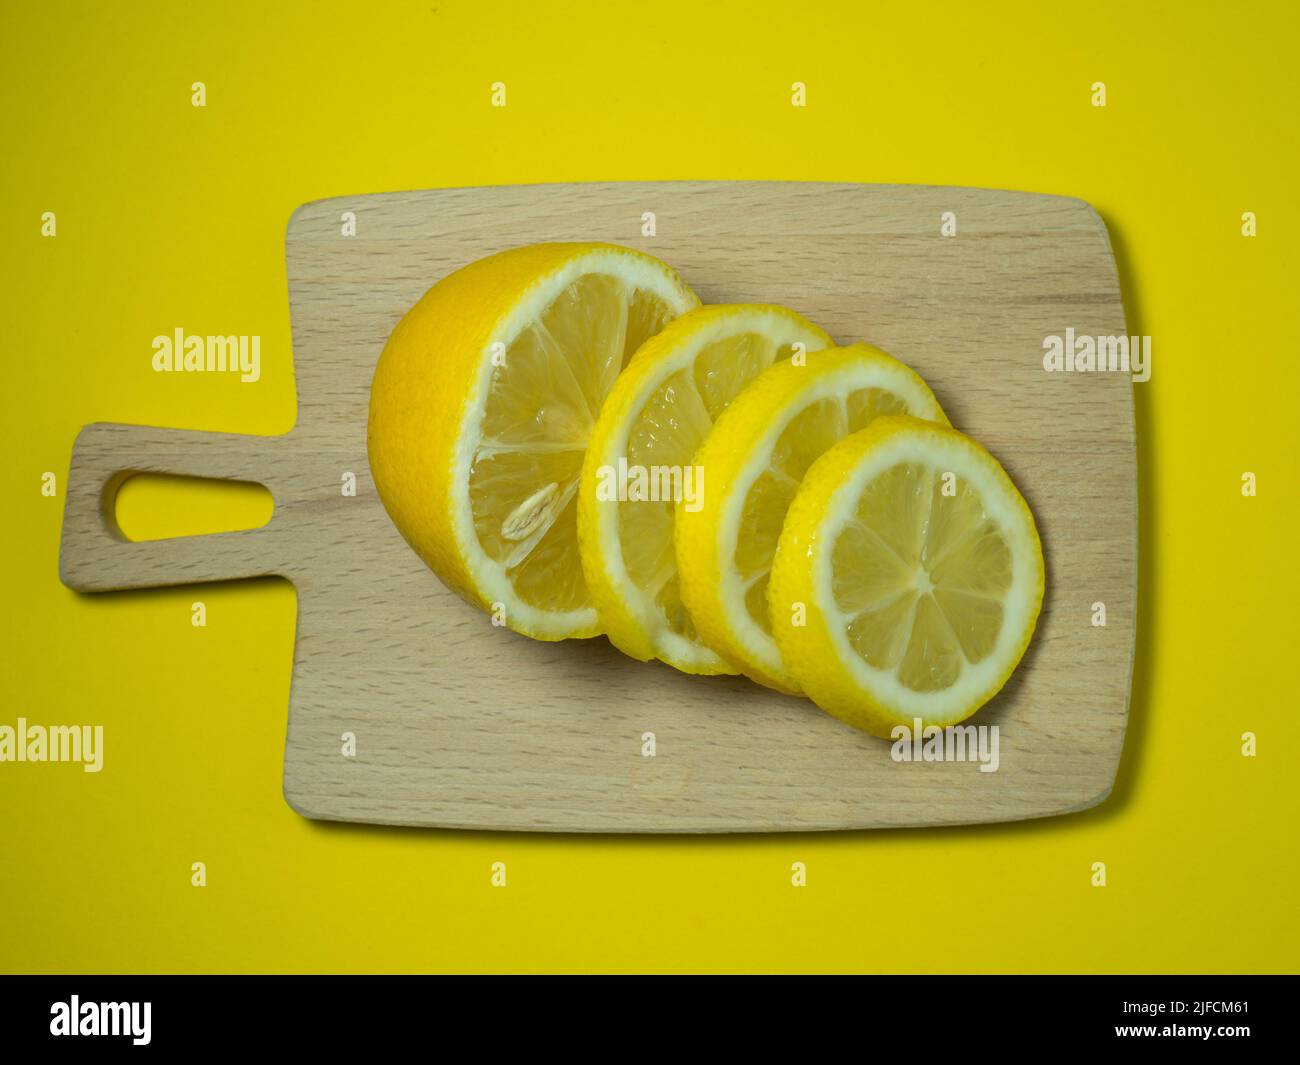 https://c8.alamy.com/comp/2JFCM61/a-sliced-lemon-on-a-small-cutting-board-on-a-yellow-background-citrus-on-the-table-bright-background-healthy-fortified-food-for-a-diet-sour-produ-2JFCM61.jpg